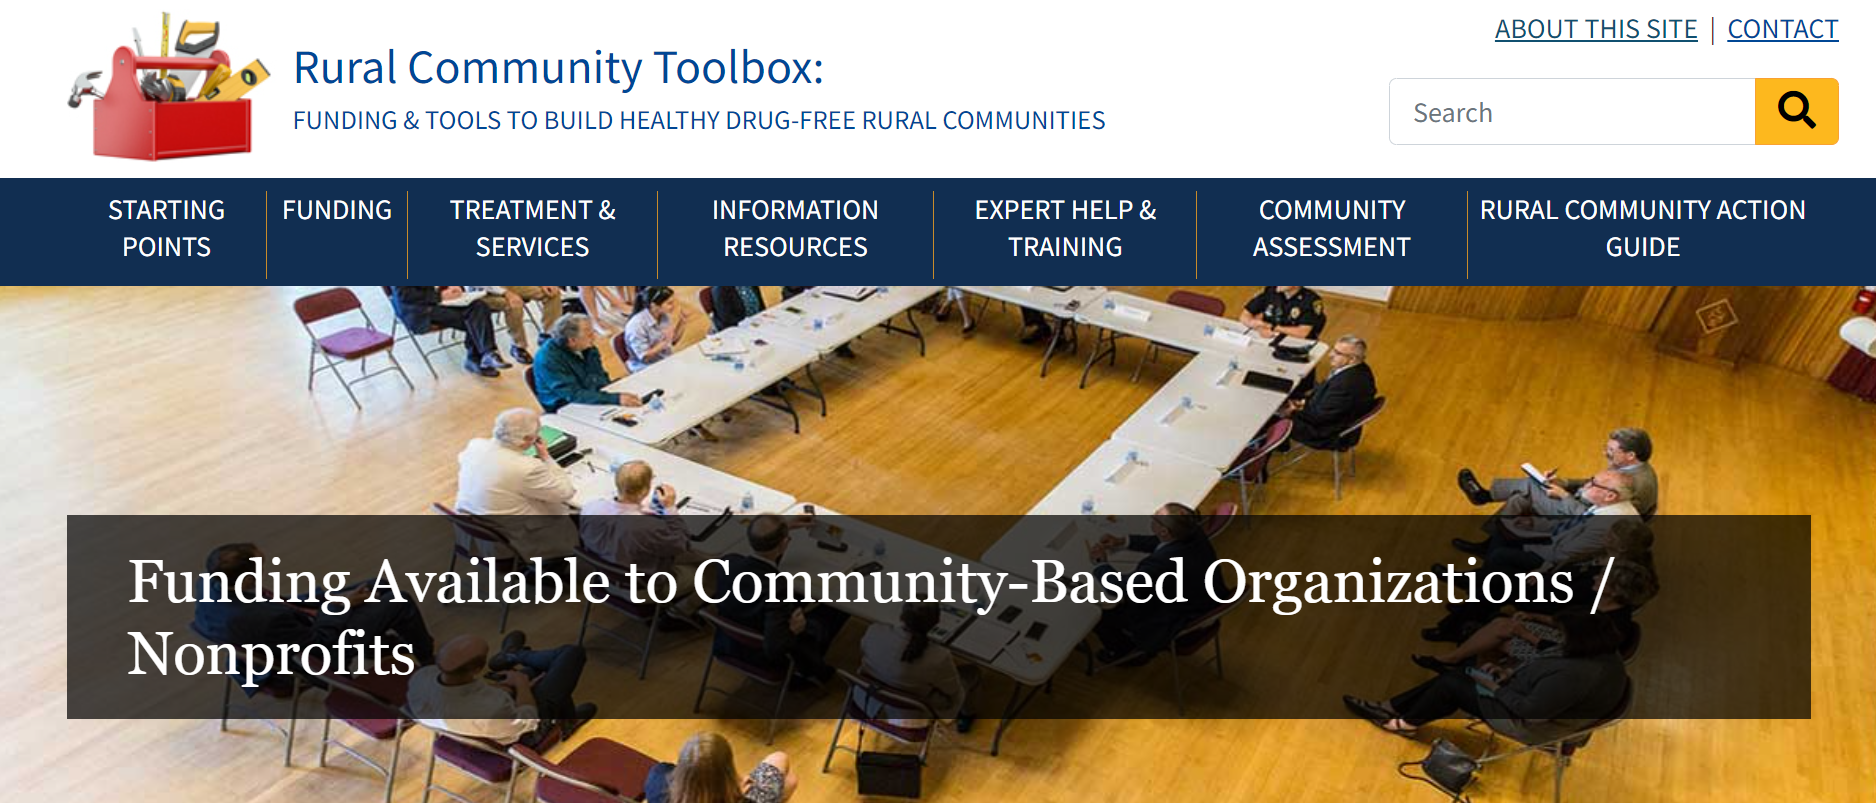 Tool: Rural Community Toolbox - Funding and Tools to Build Healthy Drug-Free Rural Communities